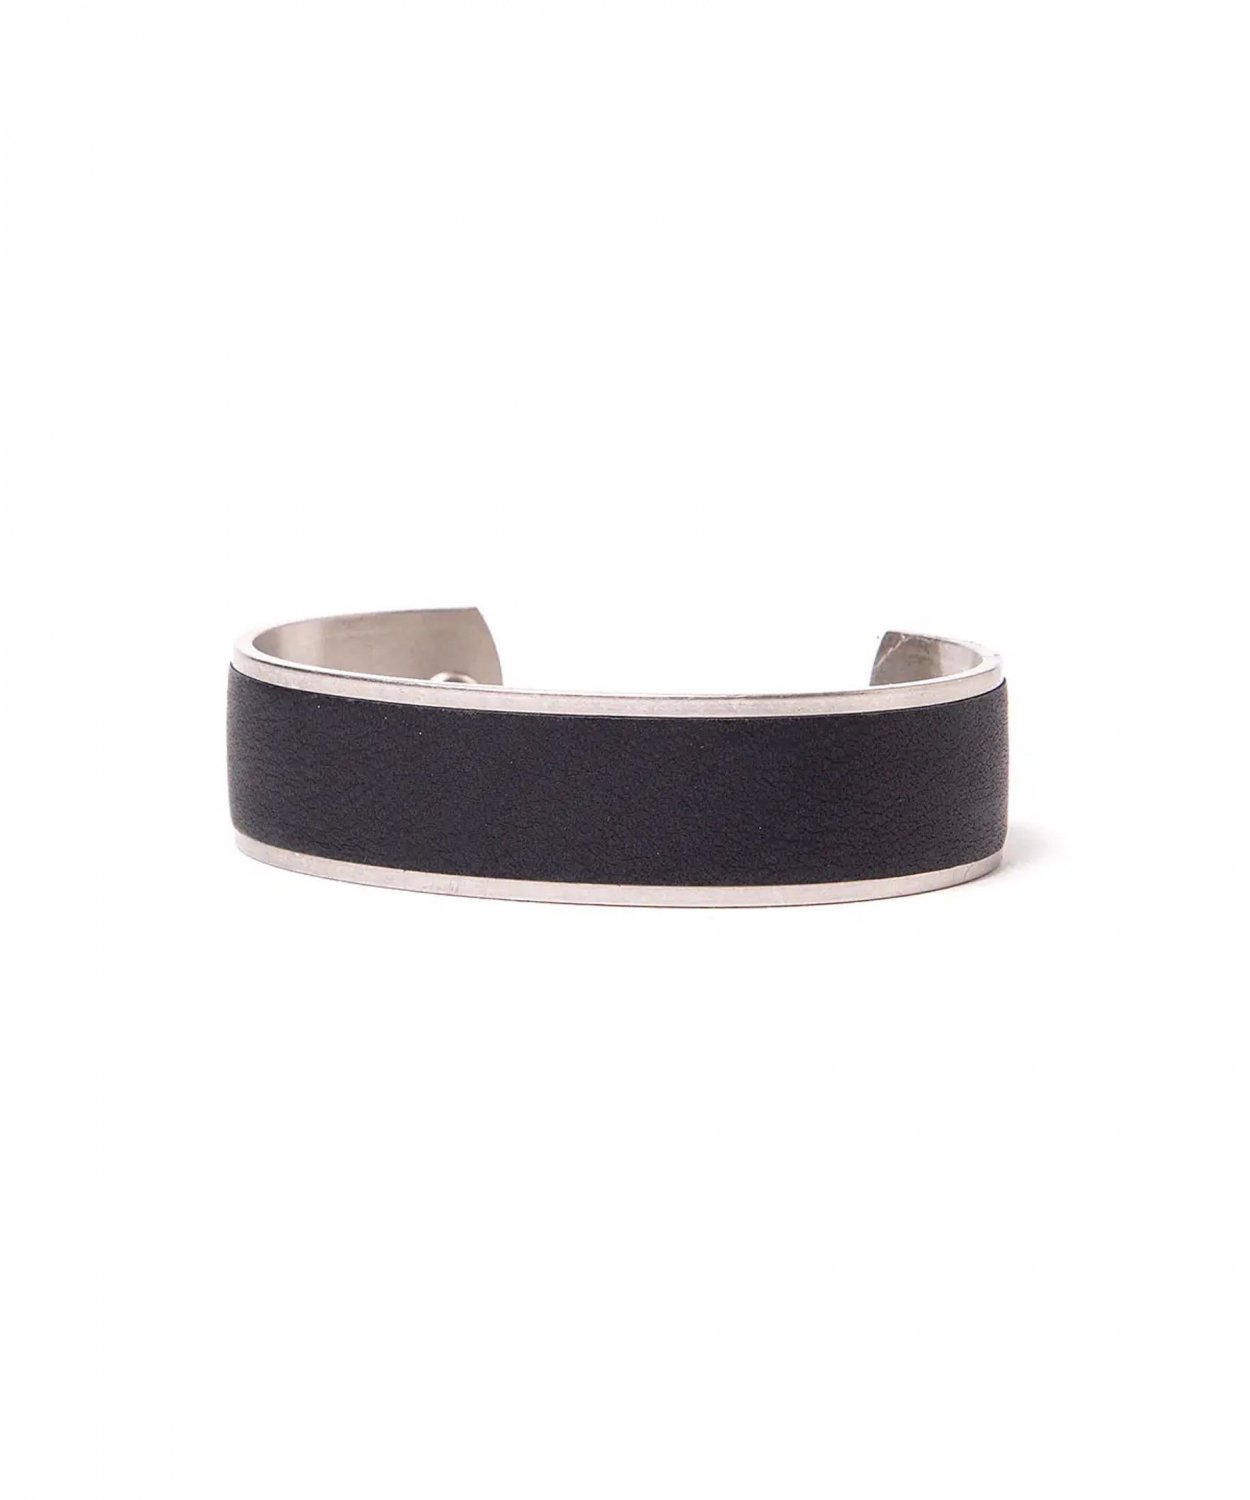 HOBO / BRASS BRACELET WIDE with COW LEATHER